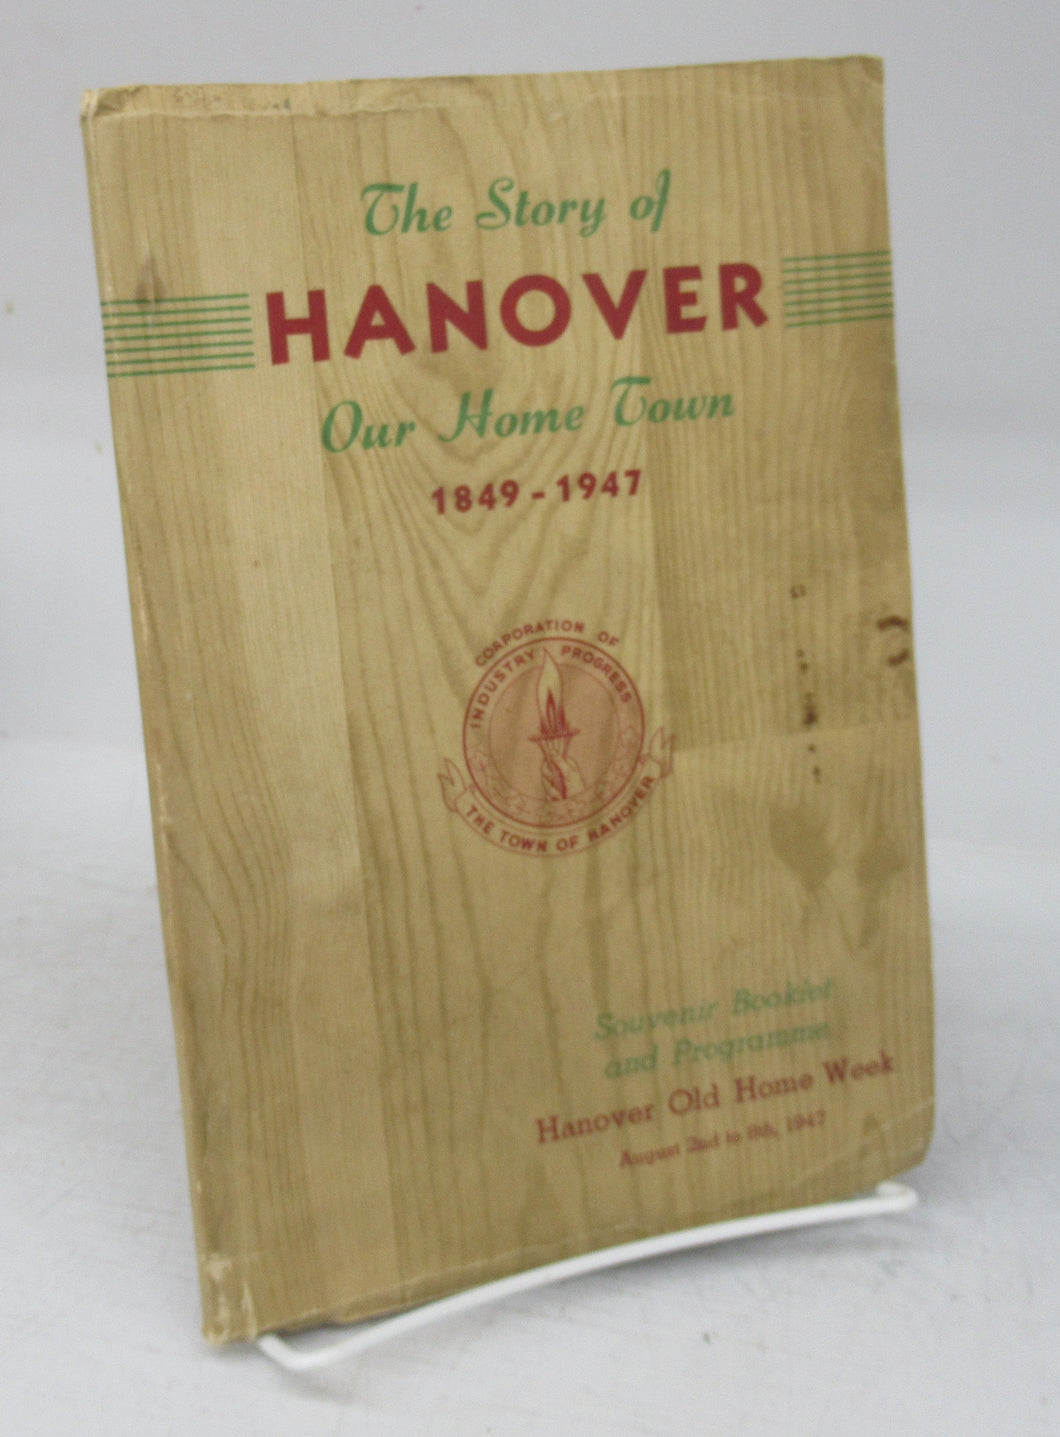 The Story of Hanover, Our Home Town, 1849-1947